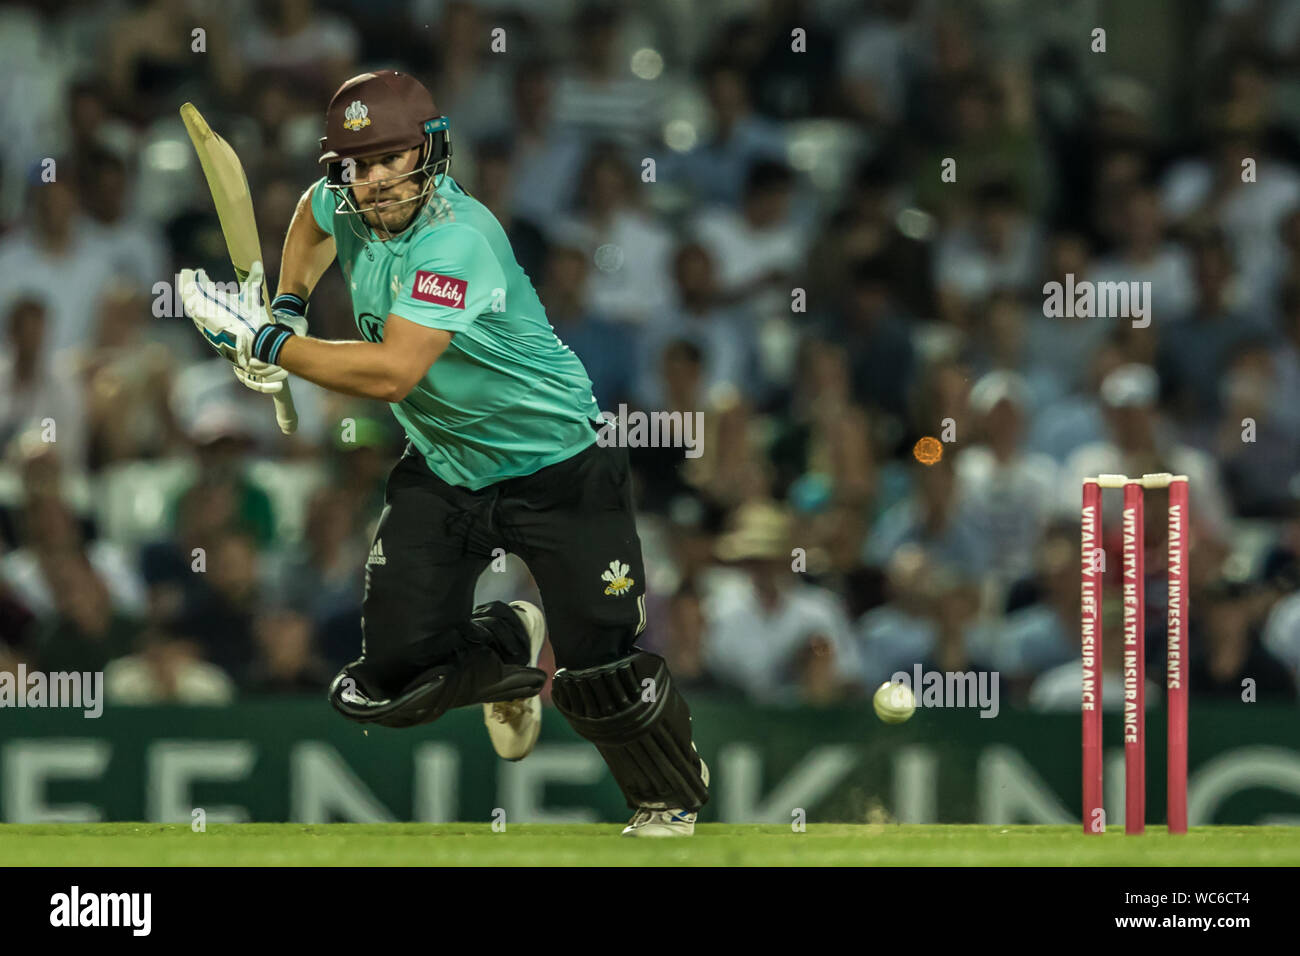 London, UK. 27 August, 2019.. Aaron Finch takes a  quick single batting as Somerset take on Surrey in the Vitality T20 Blast match at the Kia Oval. David Rowe/Alamy Live News Stock Photo